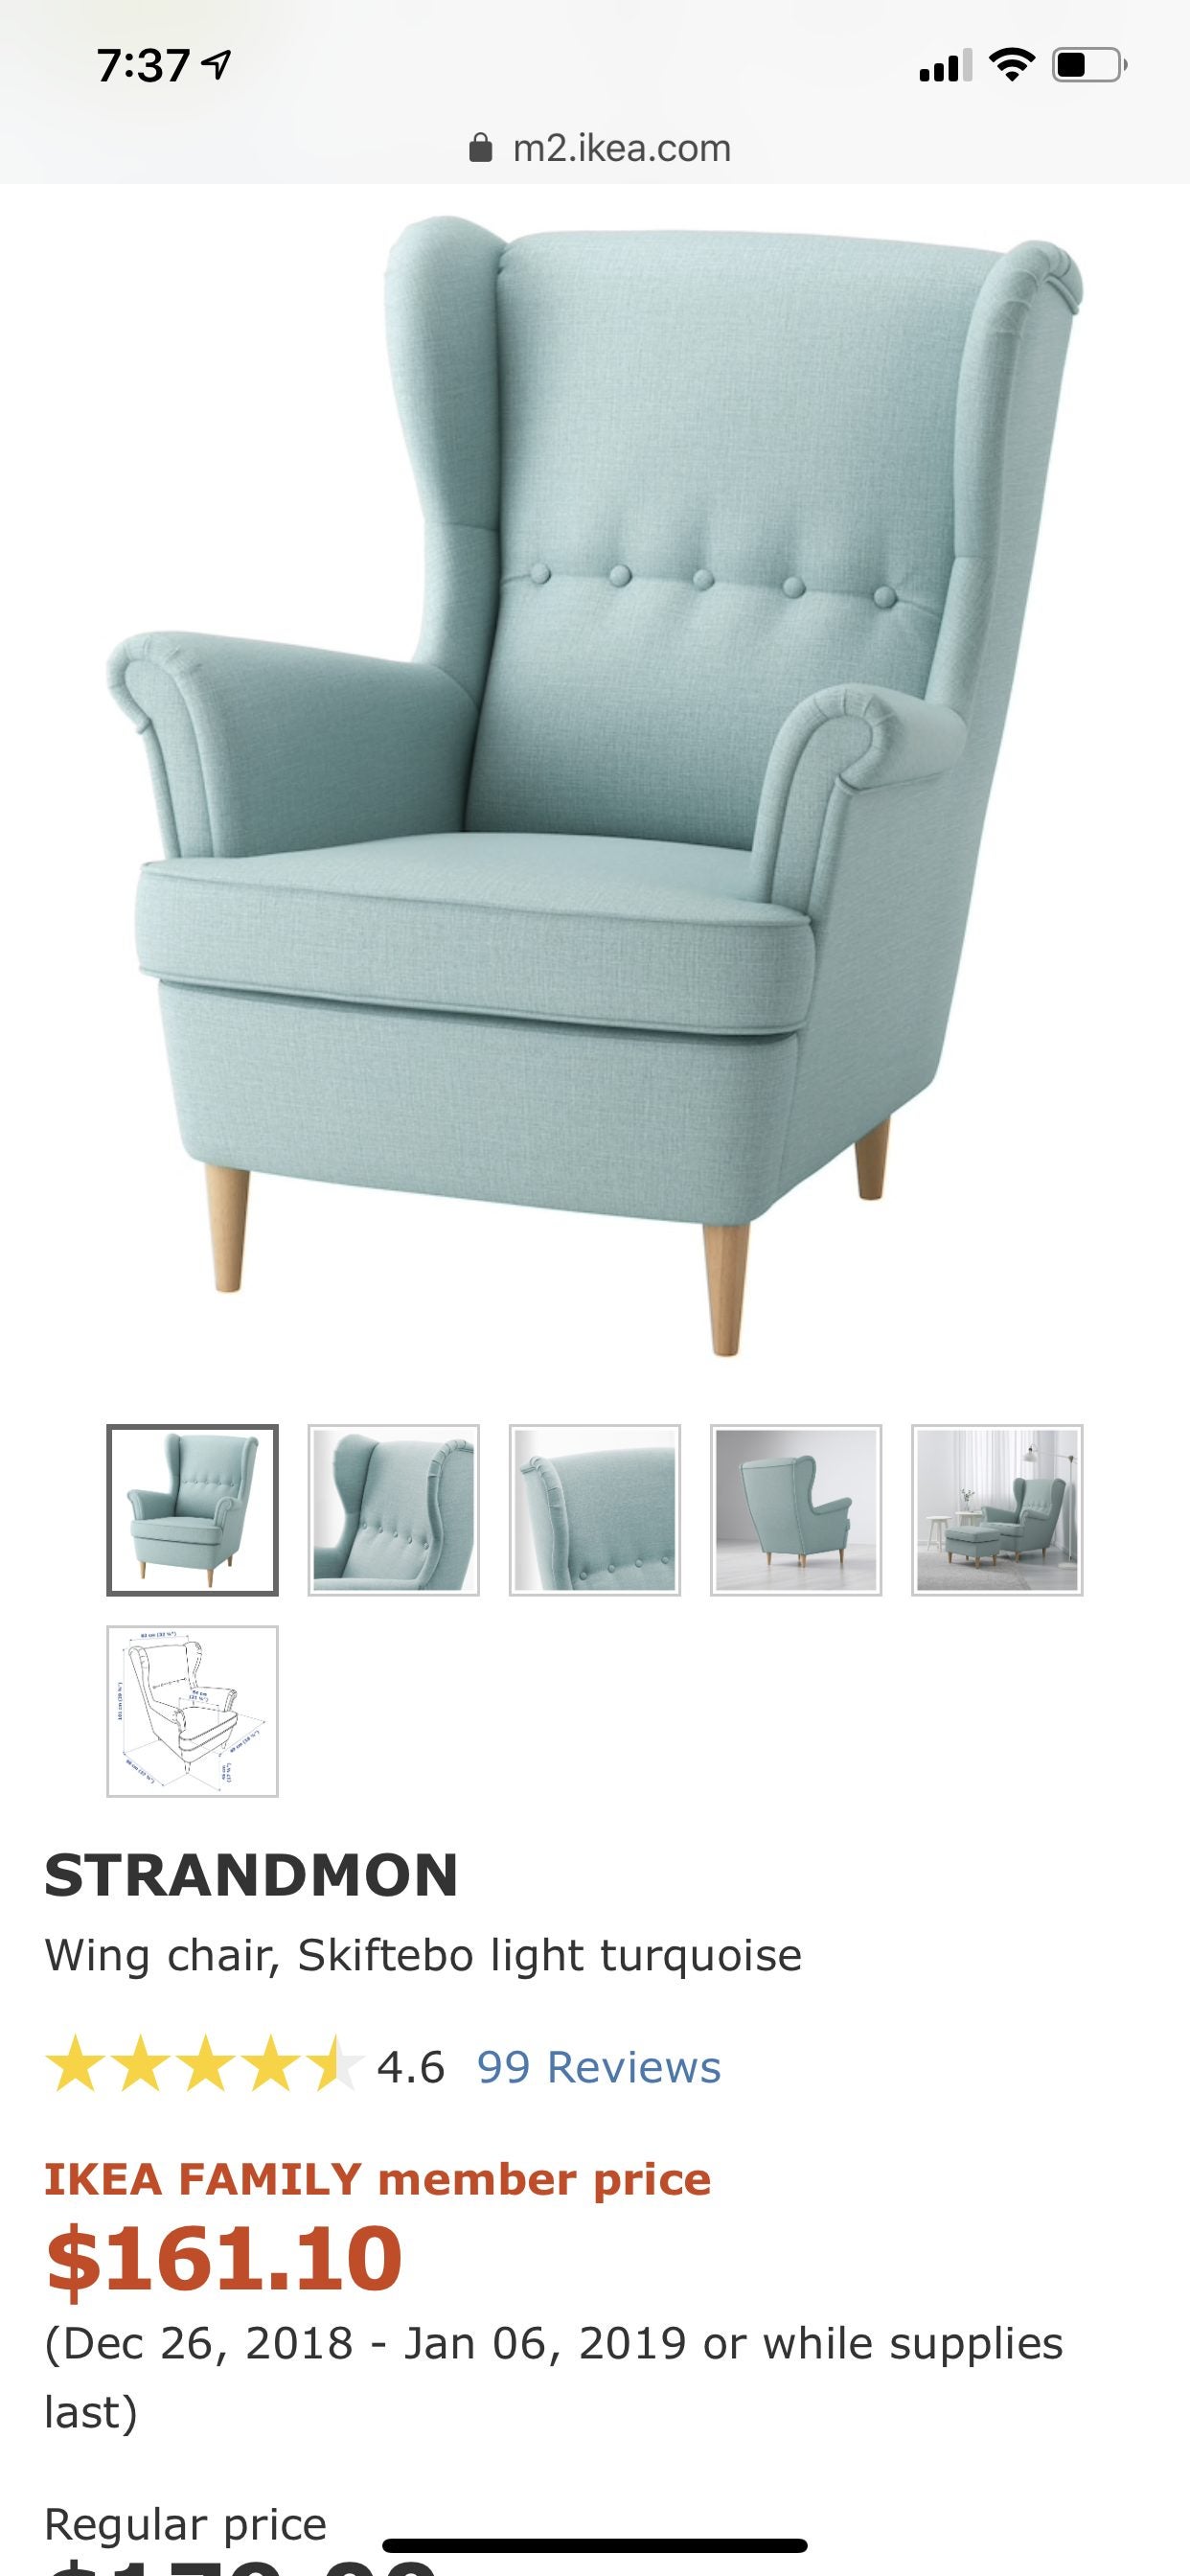 ikea wing chair light turquoise strandmon family price hot